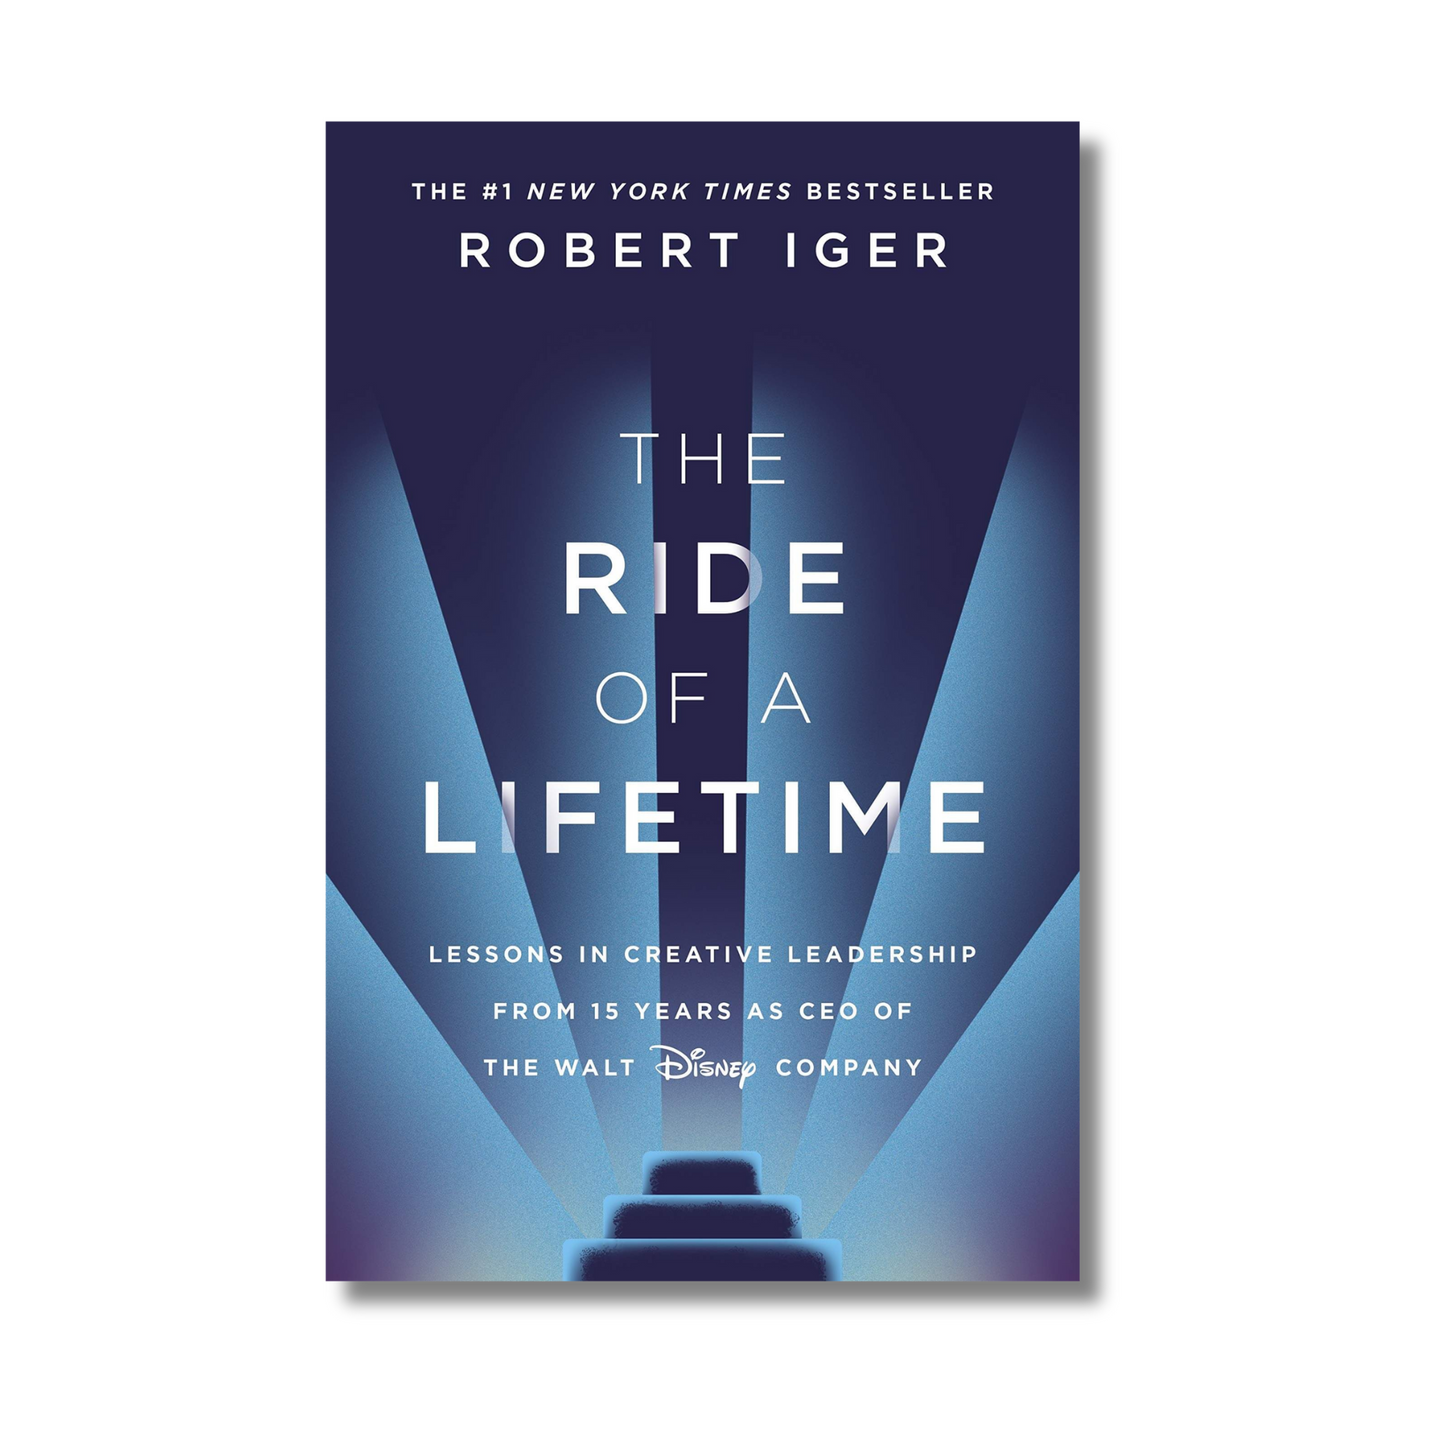 The Ride of a Lifetime: Lessons in Creative Leadership from 15 Years as CEO of the Walt Disney Company (Paperback)